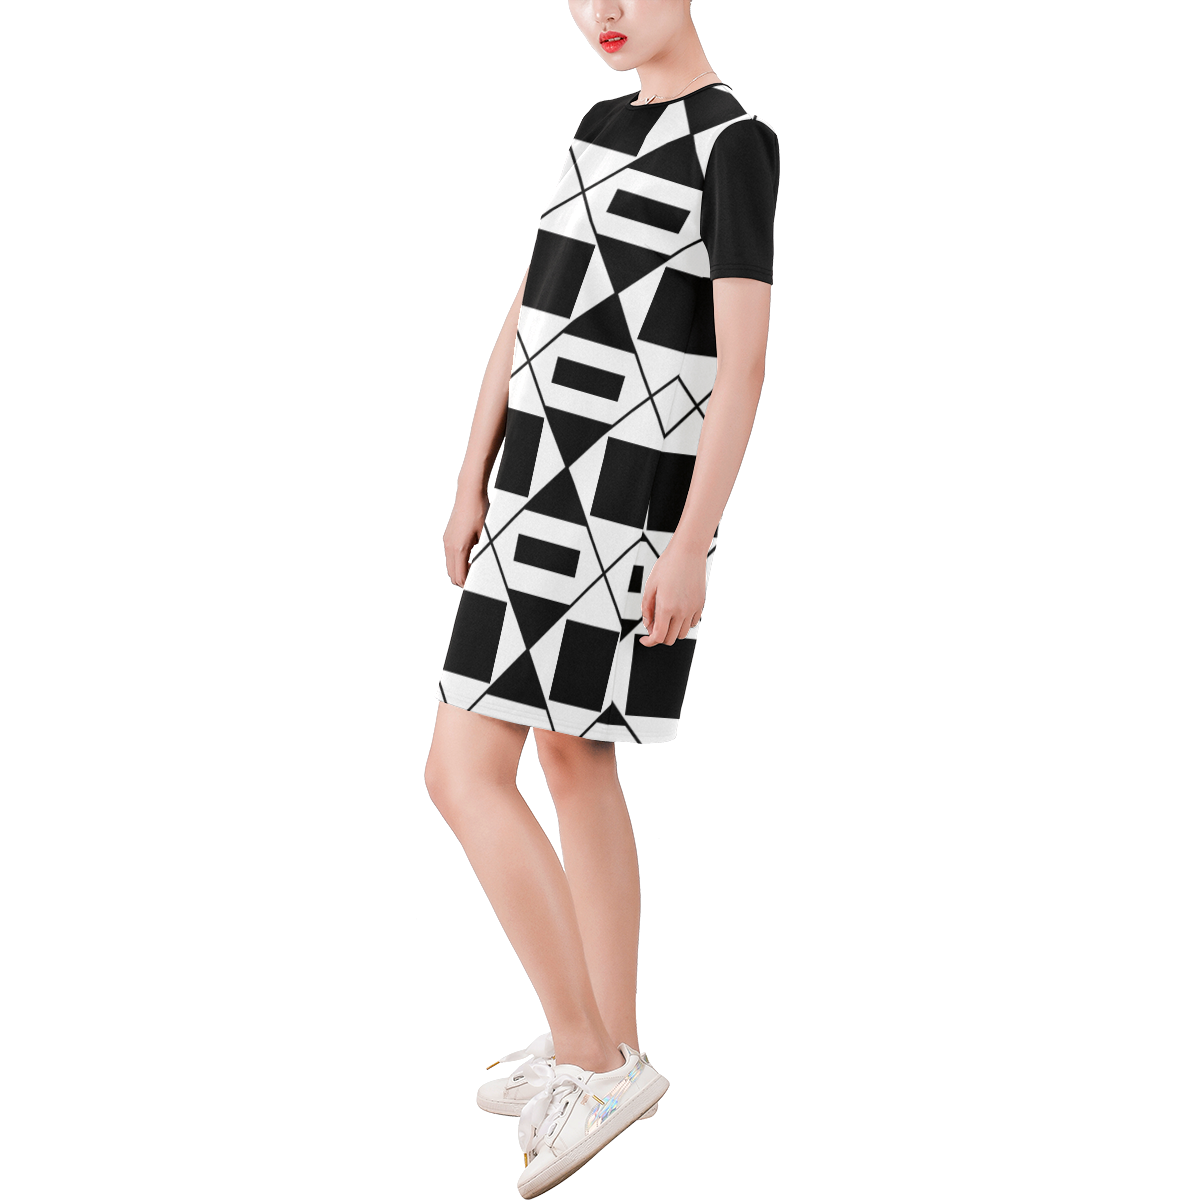 Abstract geometric pattern - black and white. Short-Sleeve Round Neck A-Line Dress (Model D47)